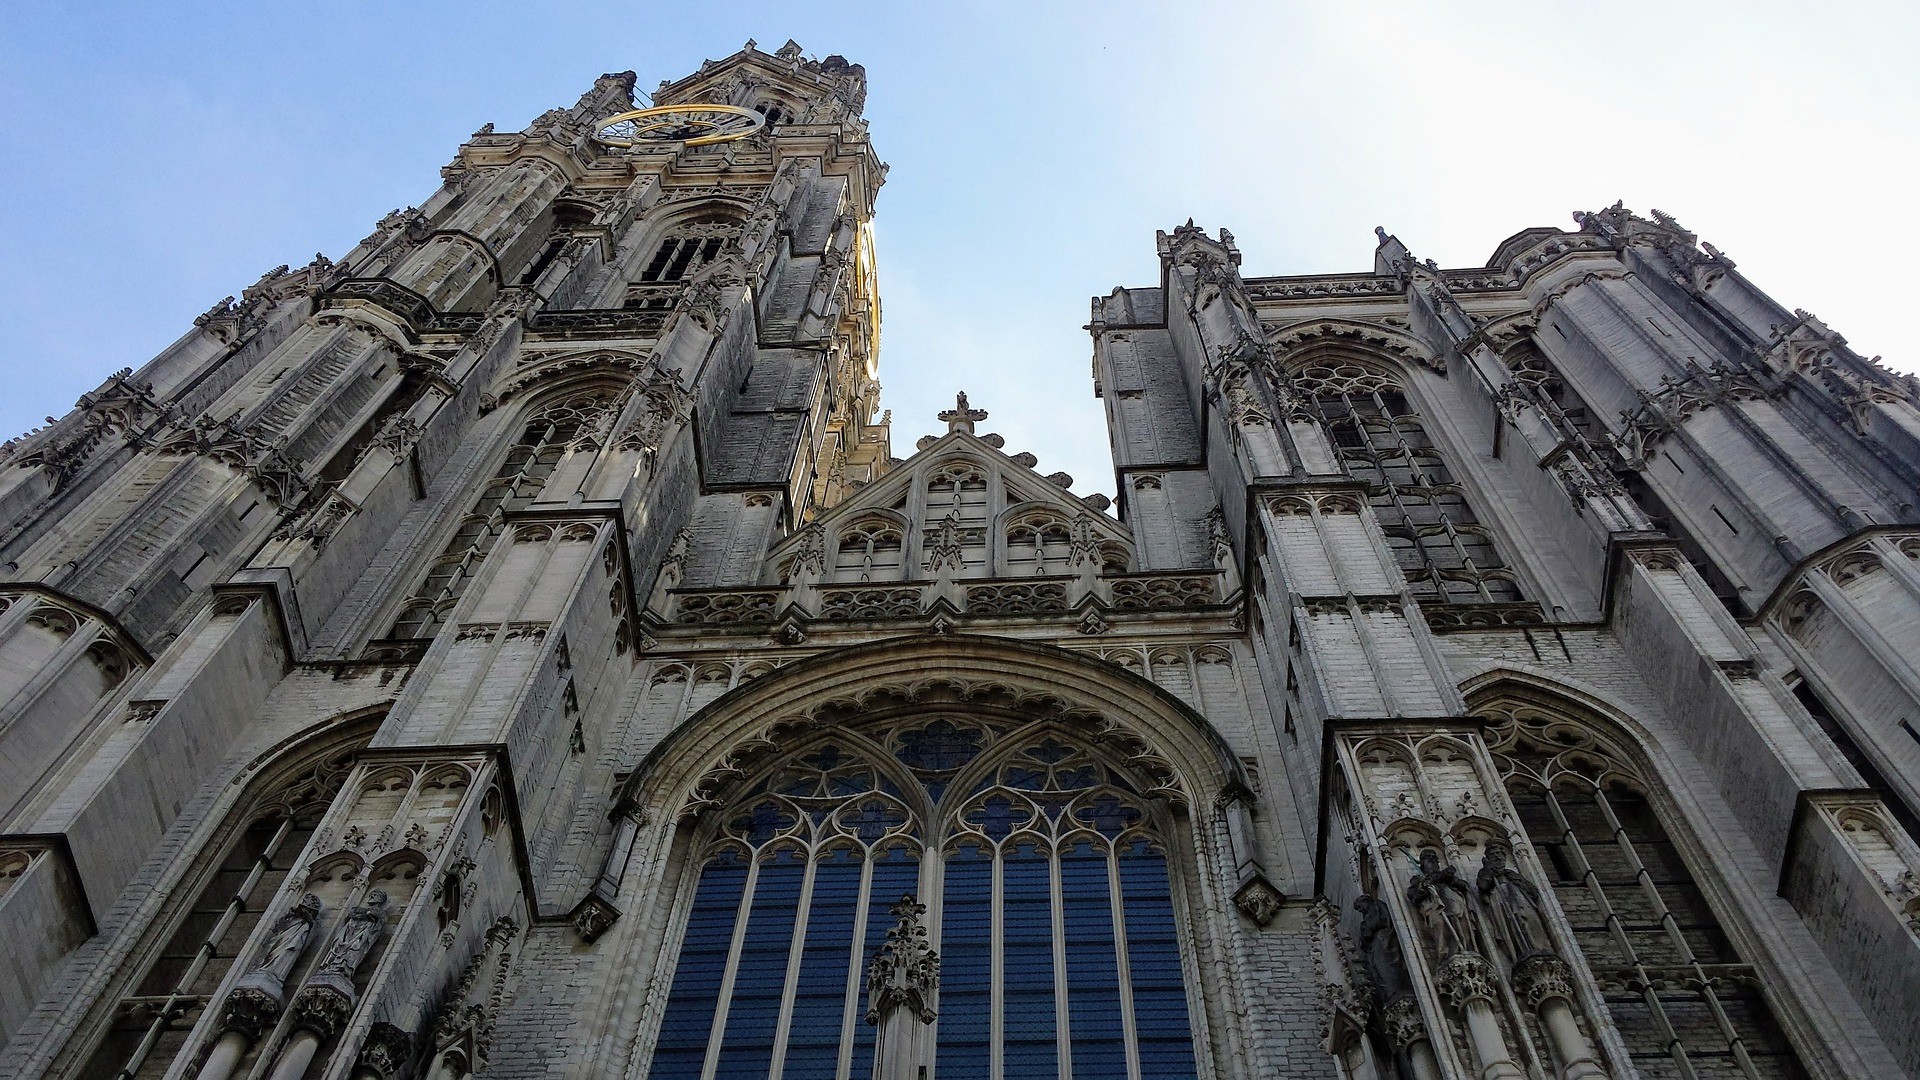 What to see in Antwerp: Antwerp Cathedral - Photo by Harry Fabel